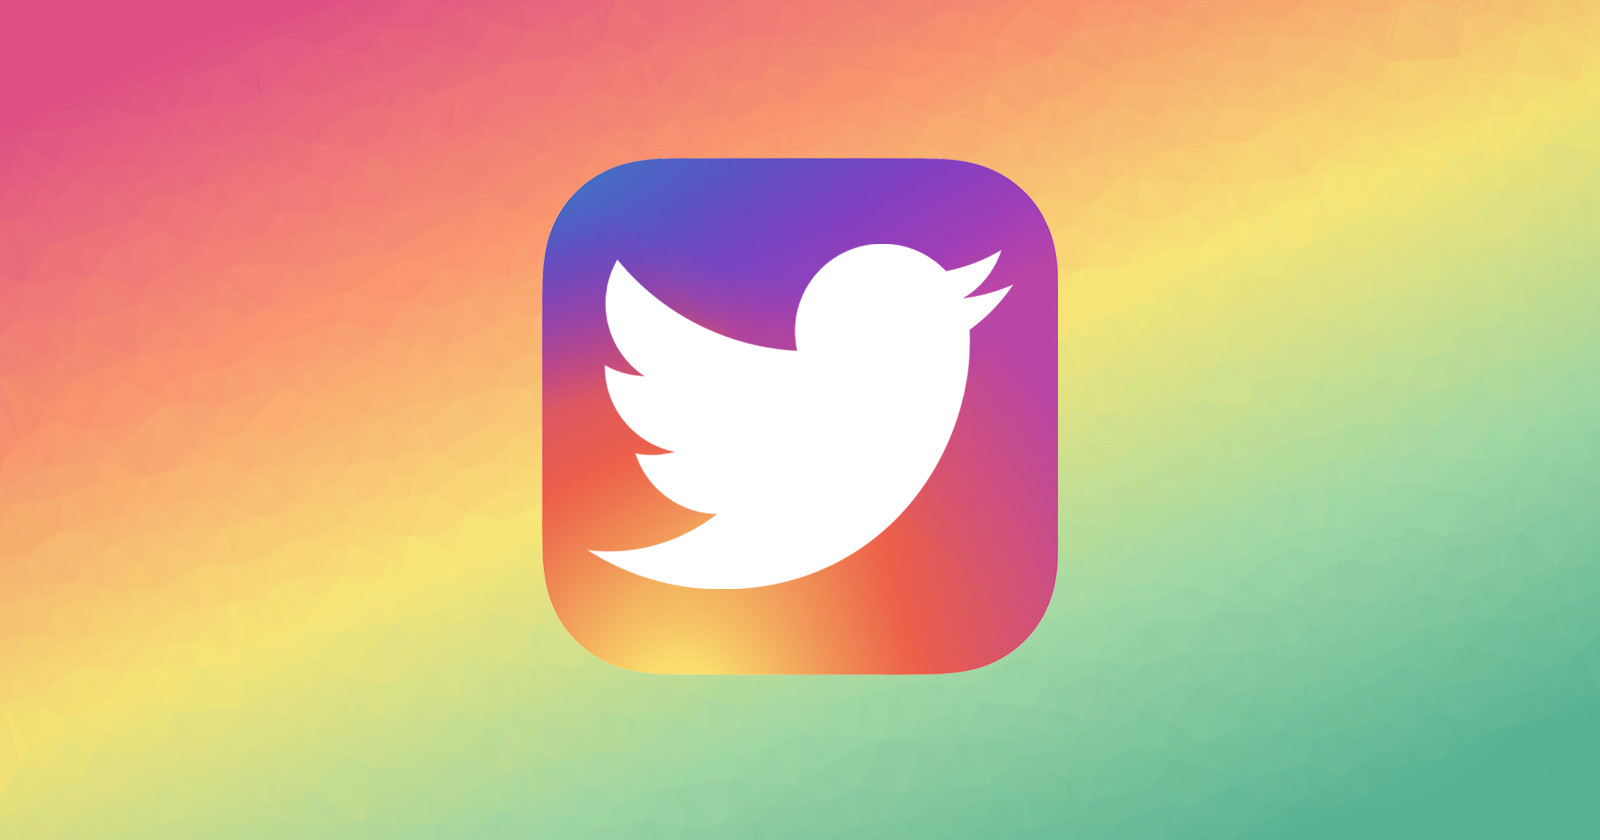 Instagram May Add Microblogging Feature in a Bid to Replace Twitter